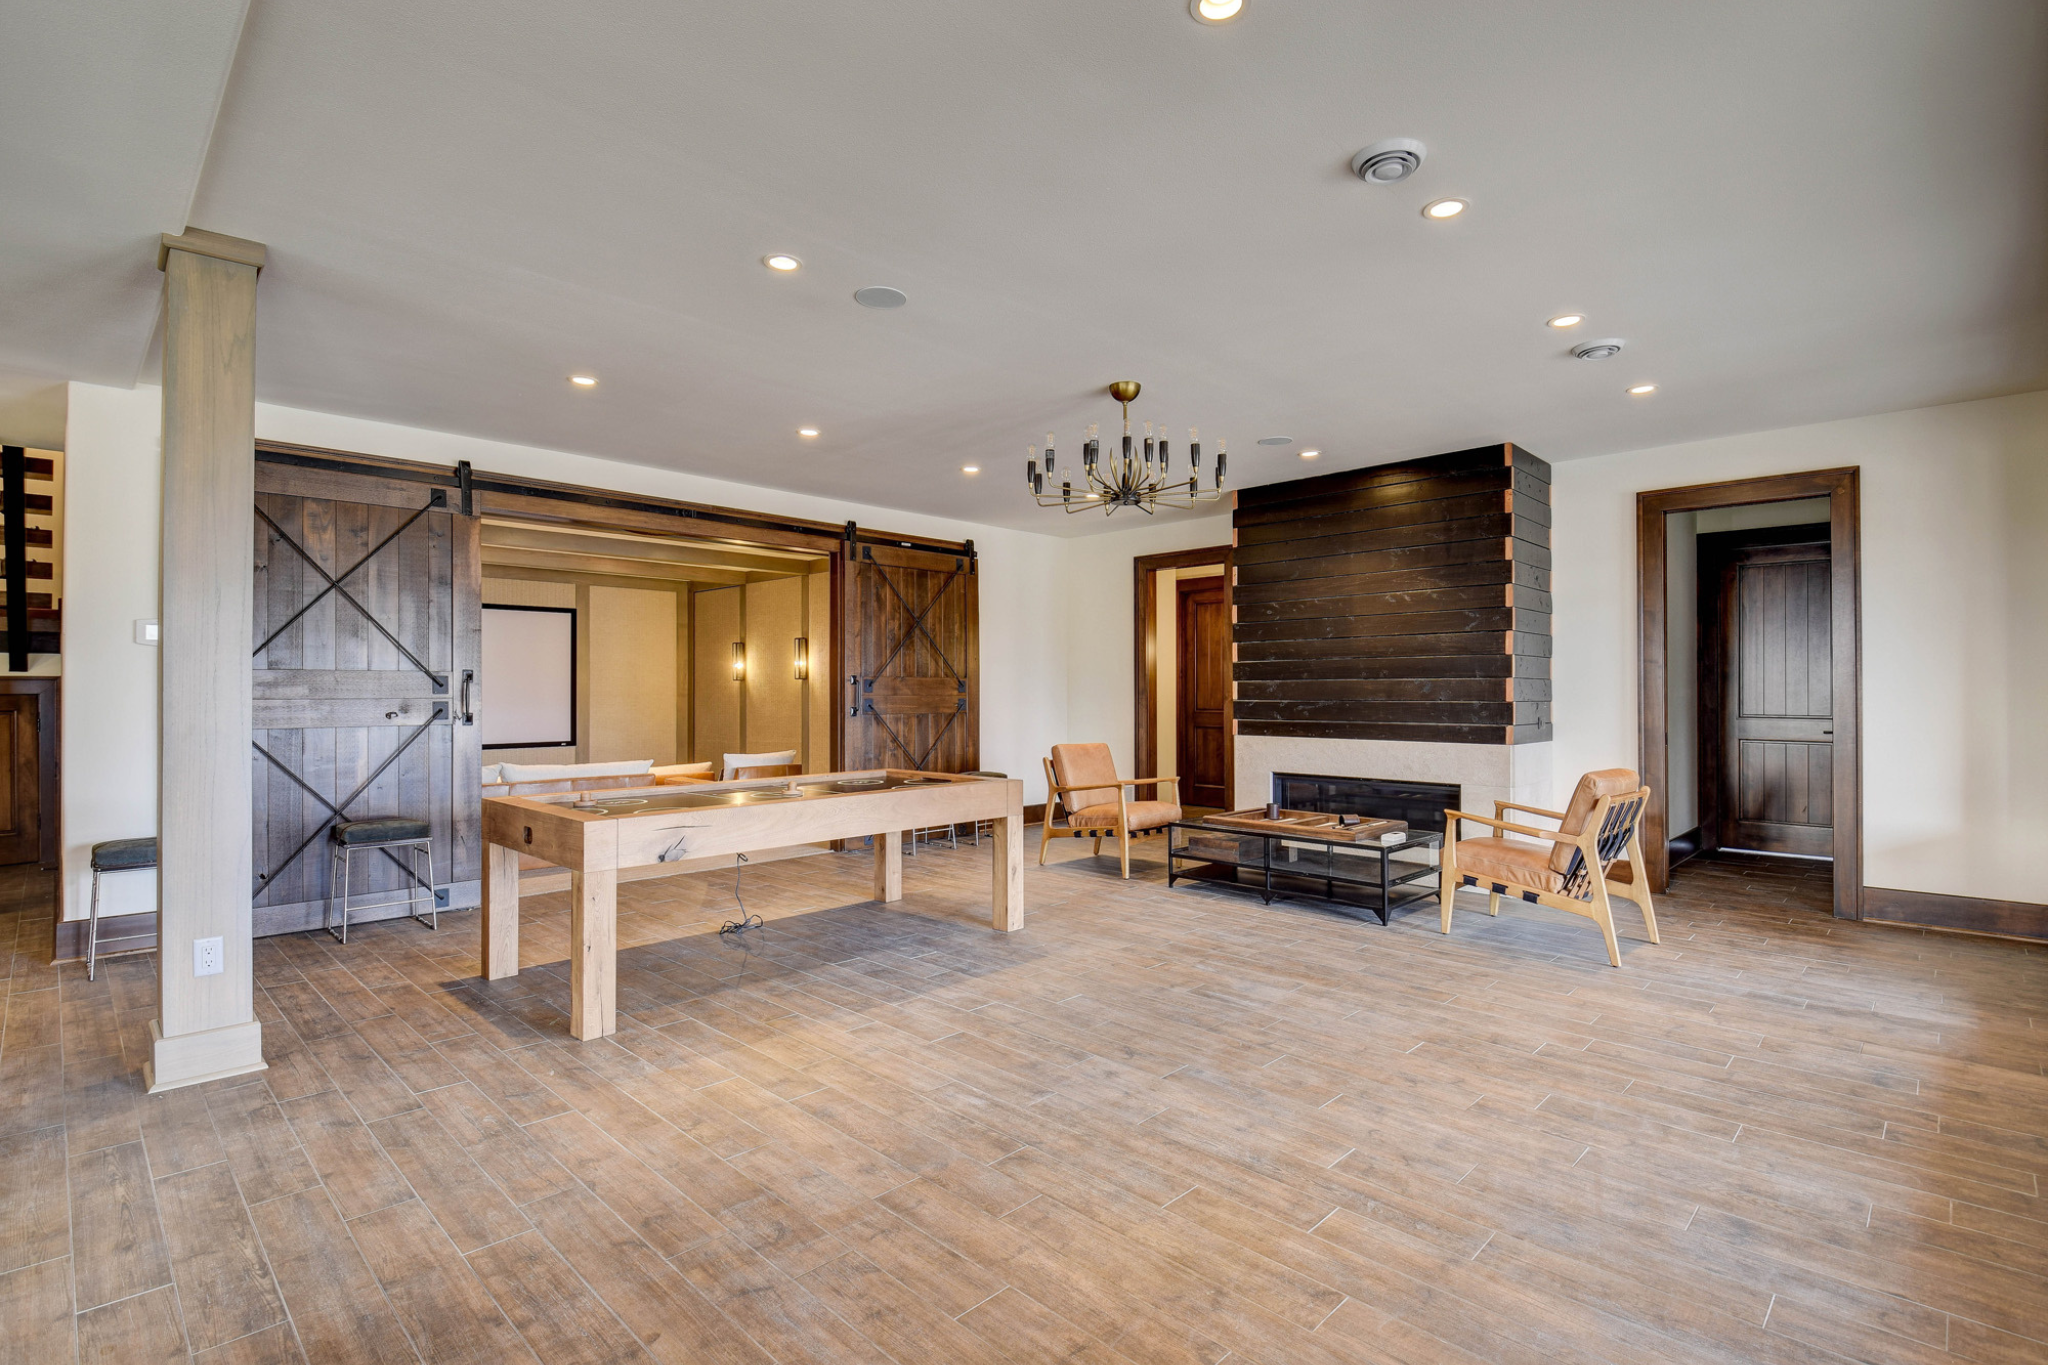 Spacious recreation room with barn doors and modern amenities in a luxury custom home.